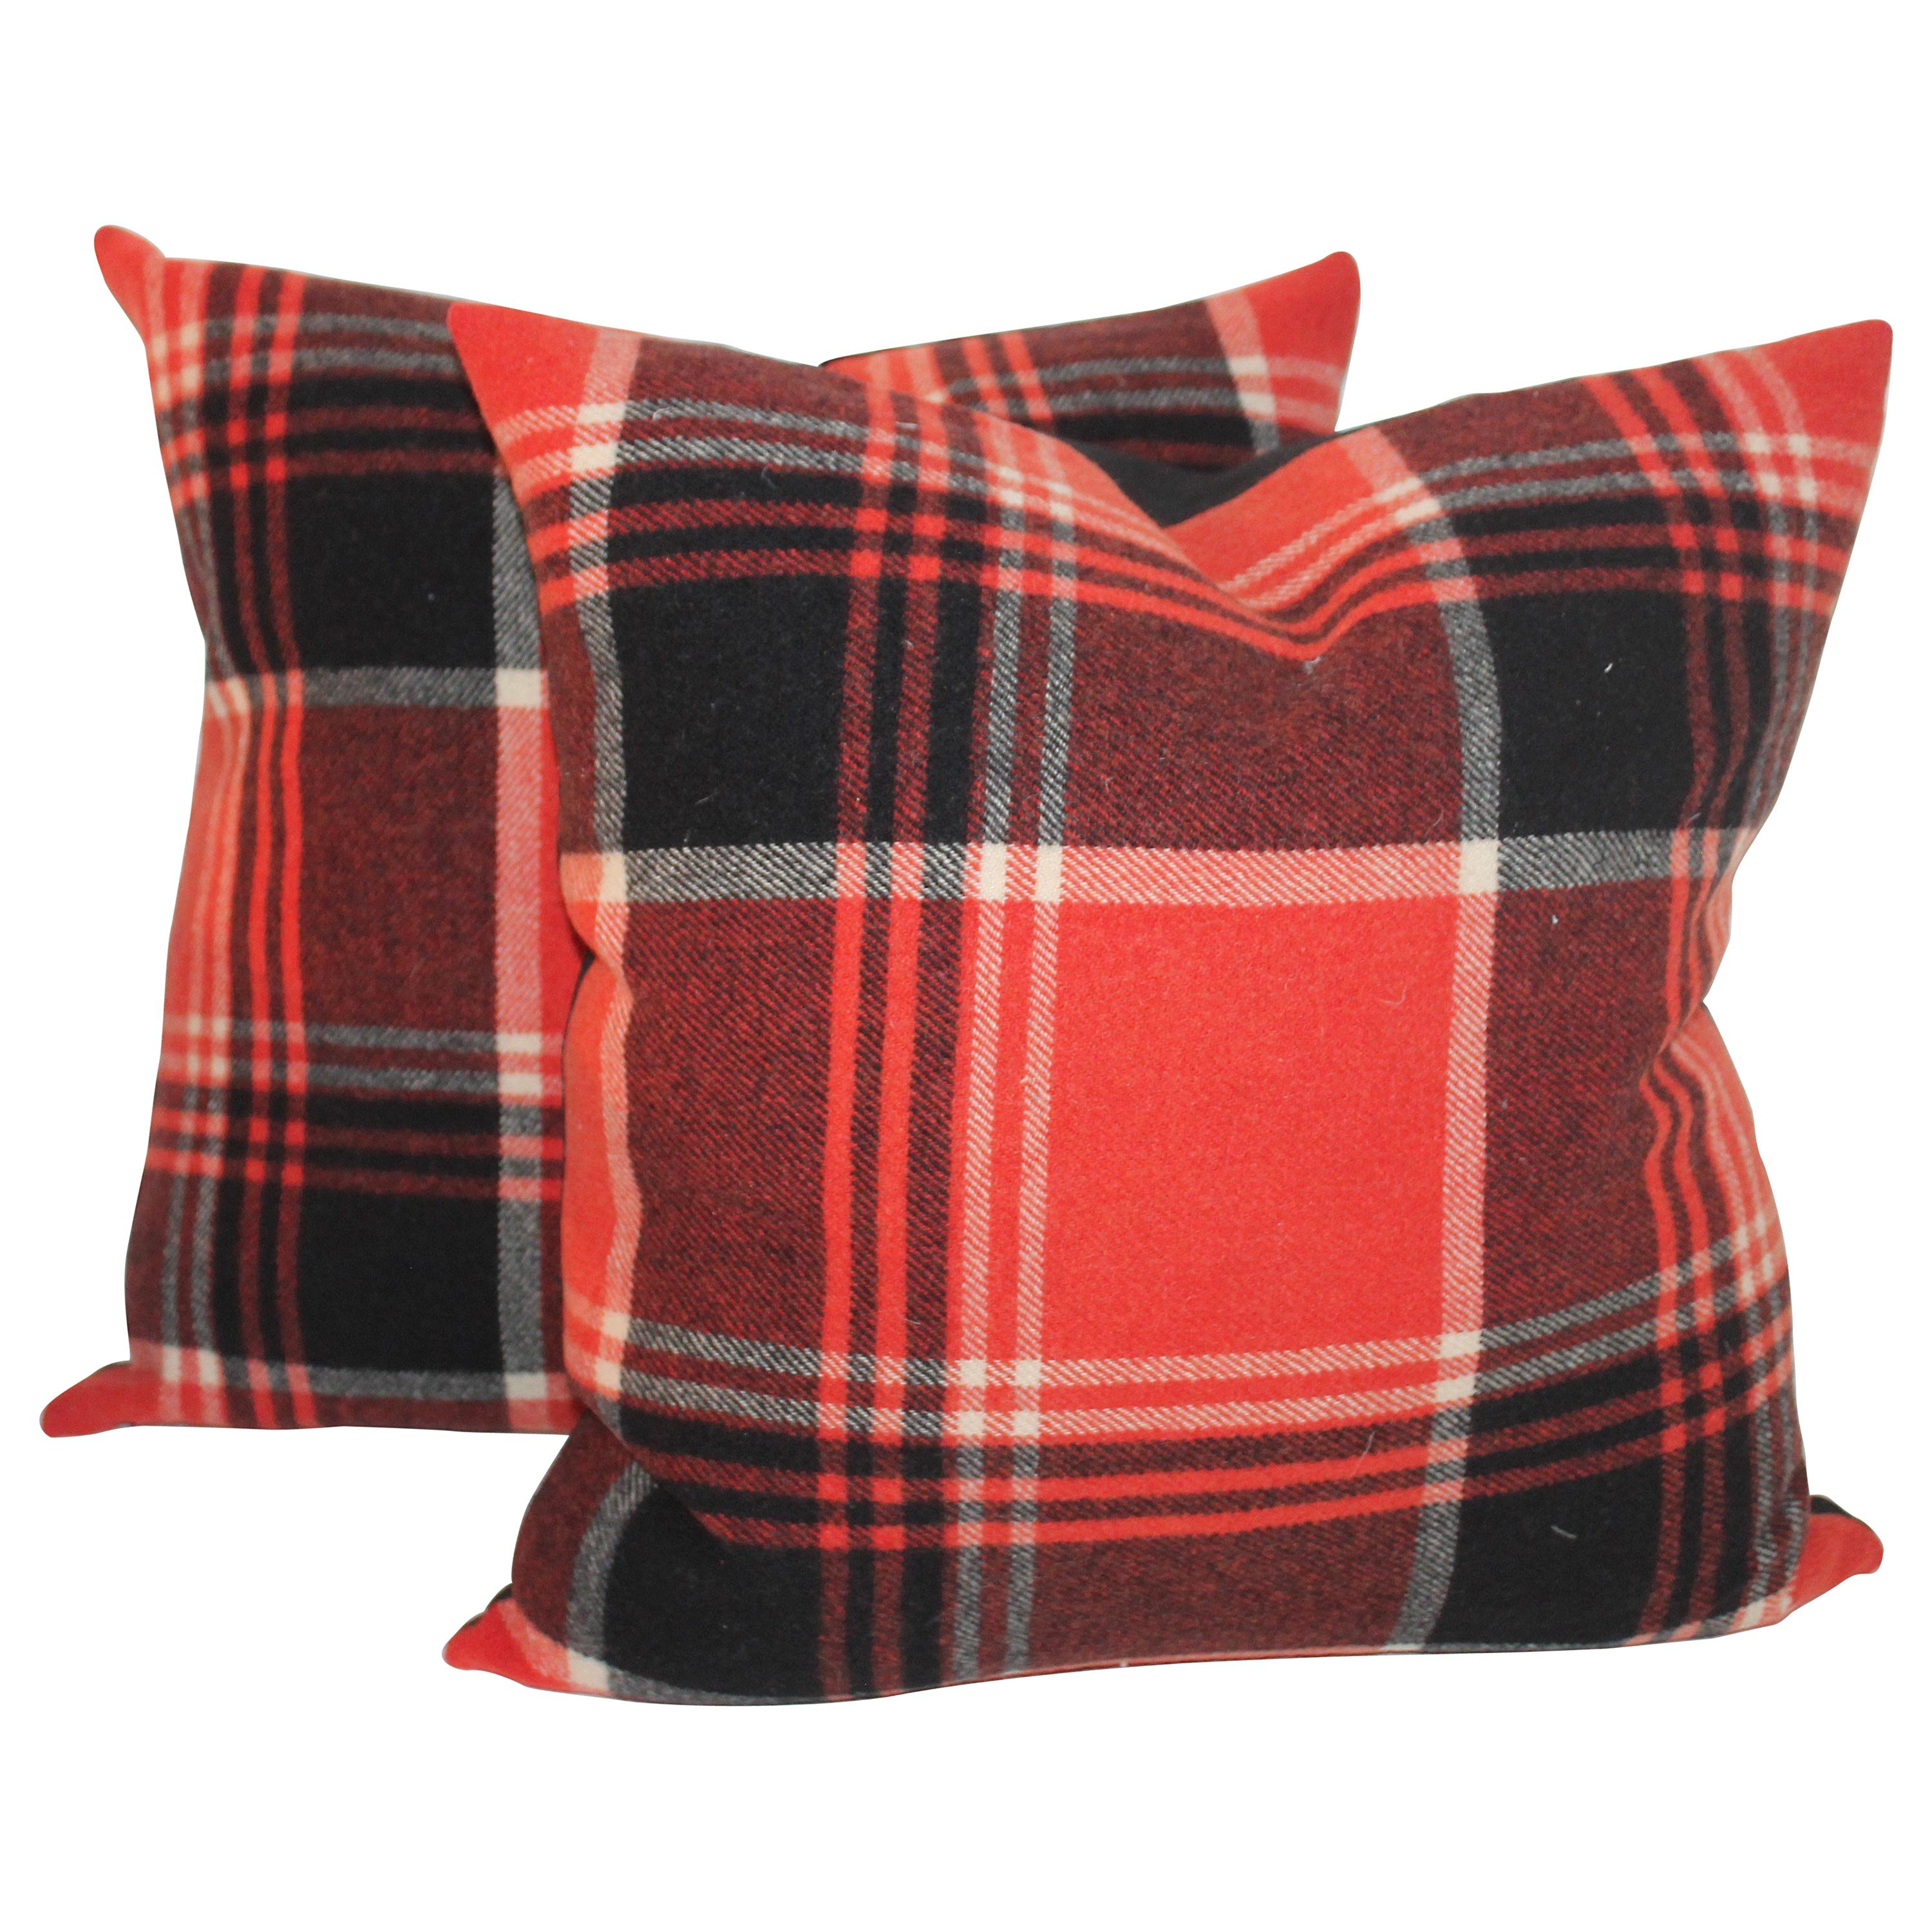 Plaid Blanket Pillows or Pair For Sale